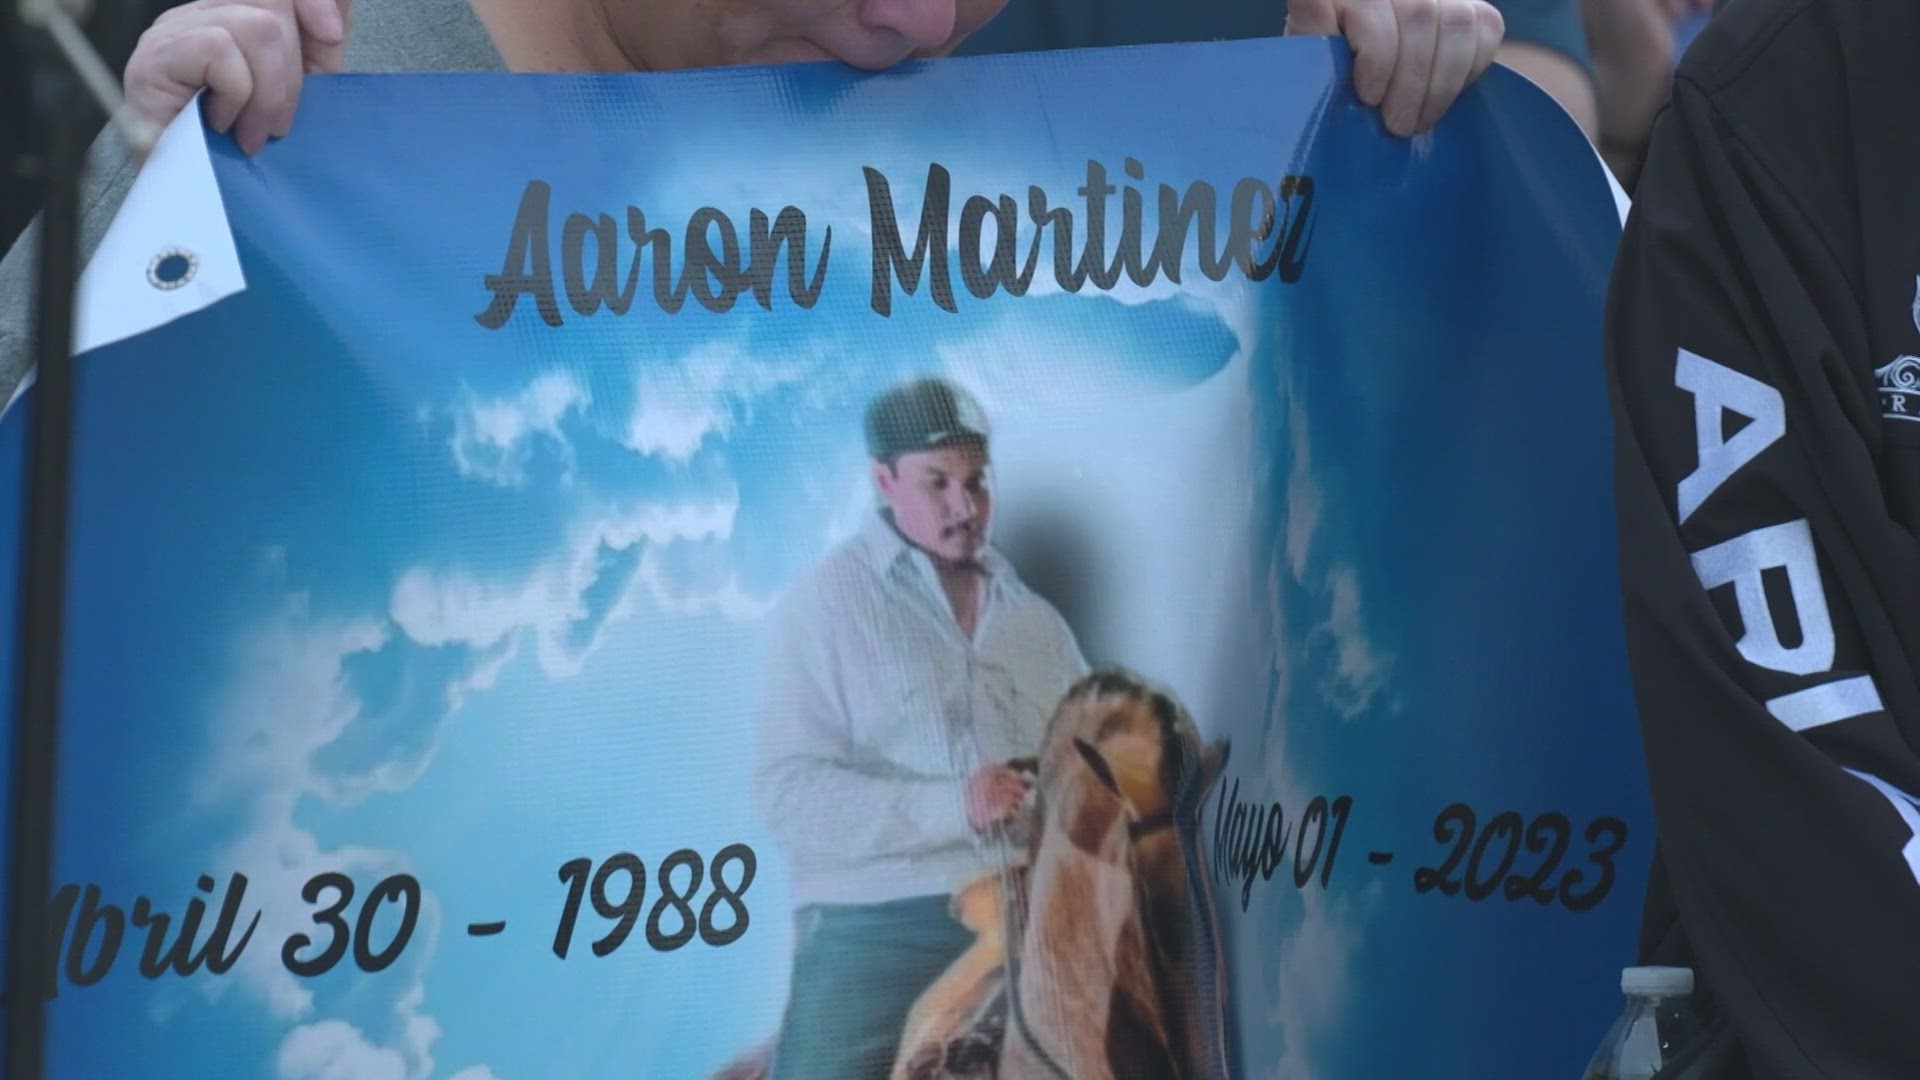 A man was arrested and charged with murder in the shooting death of Aaron Martinez.